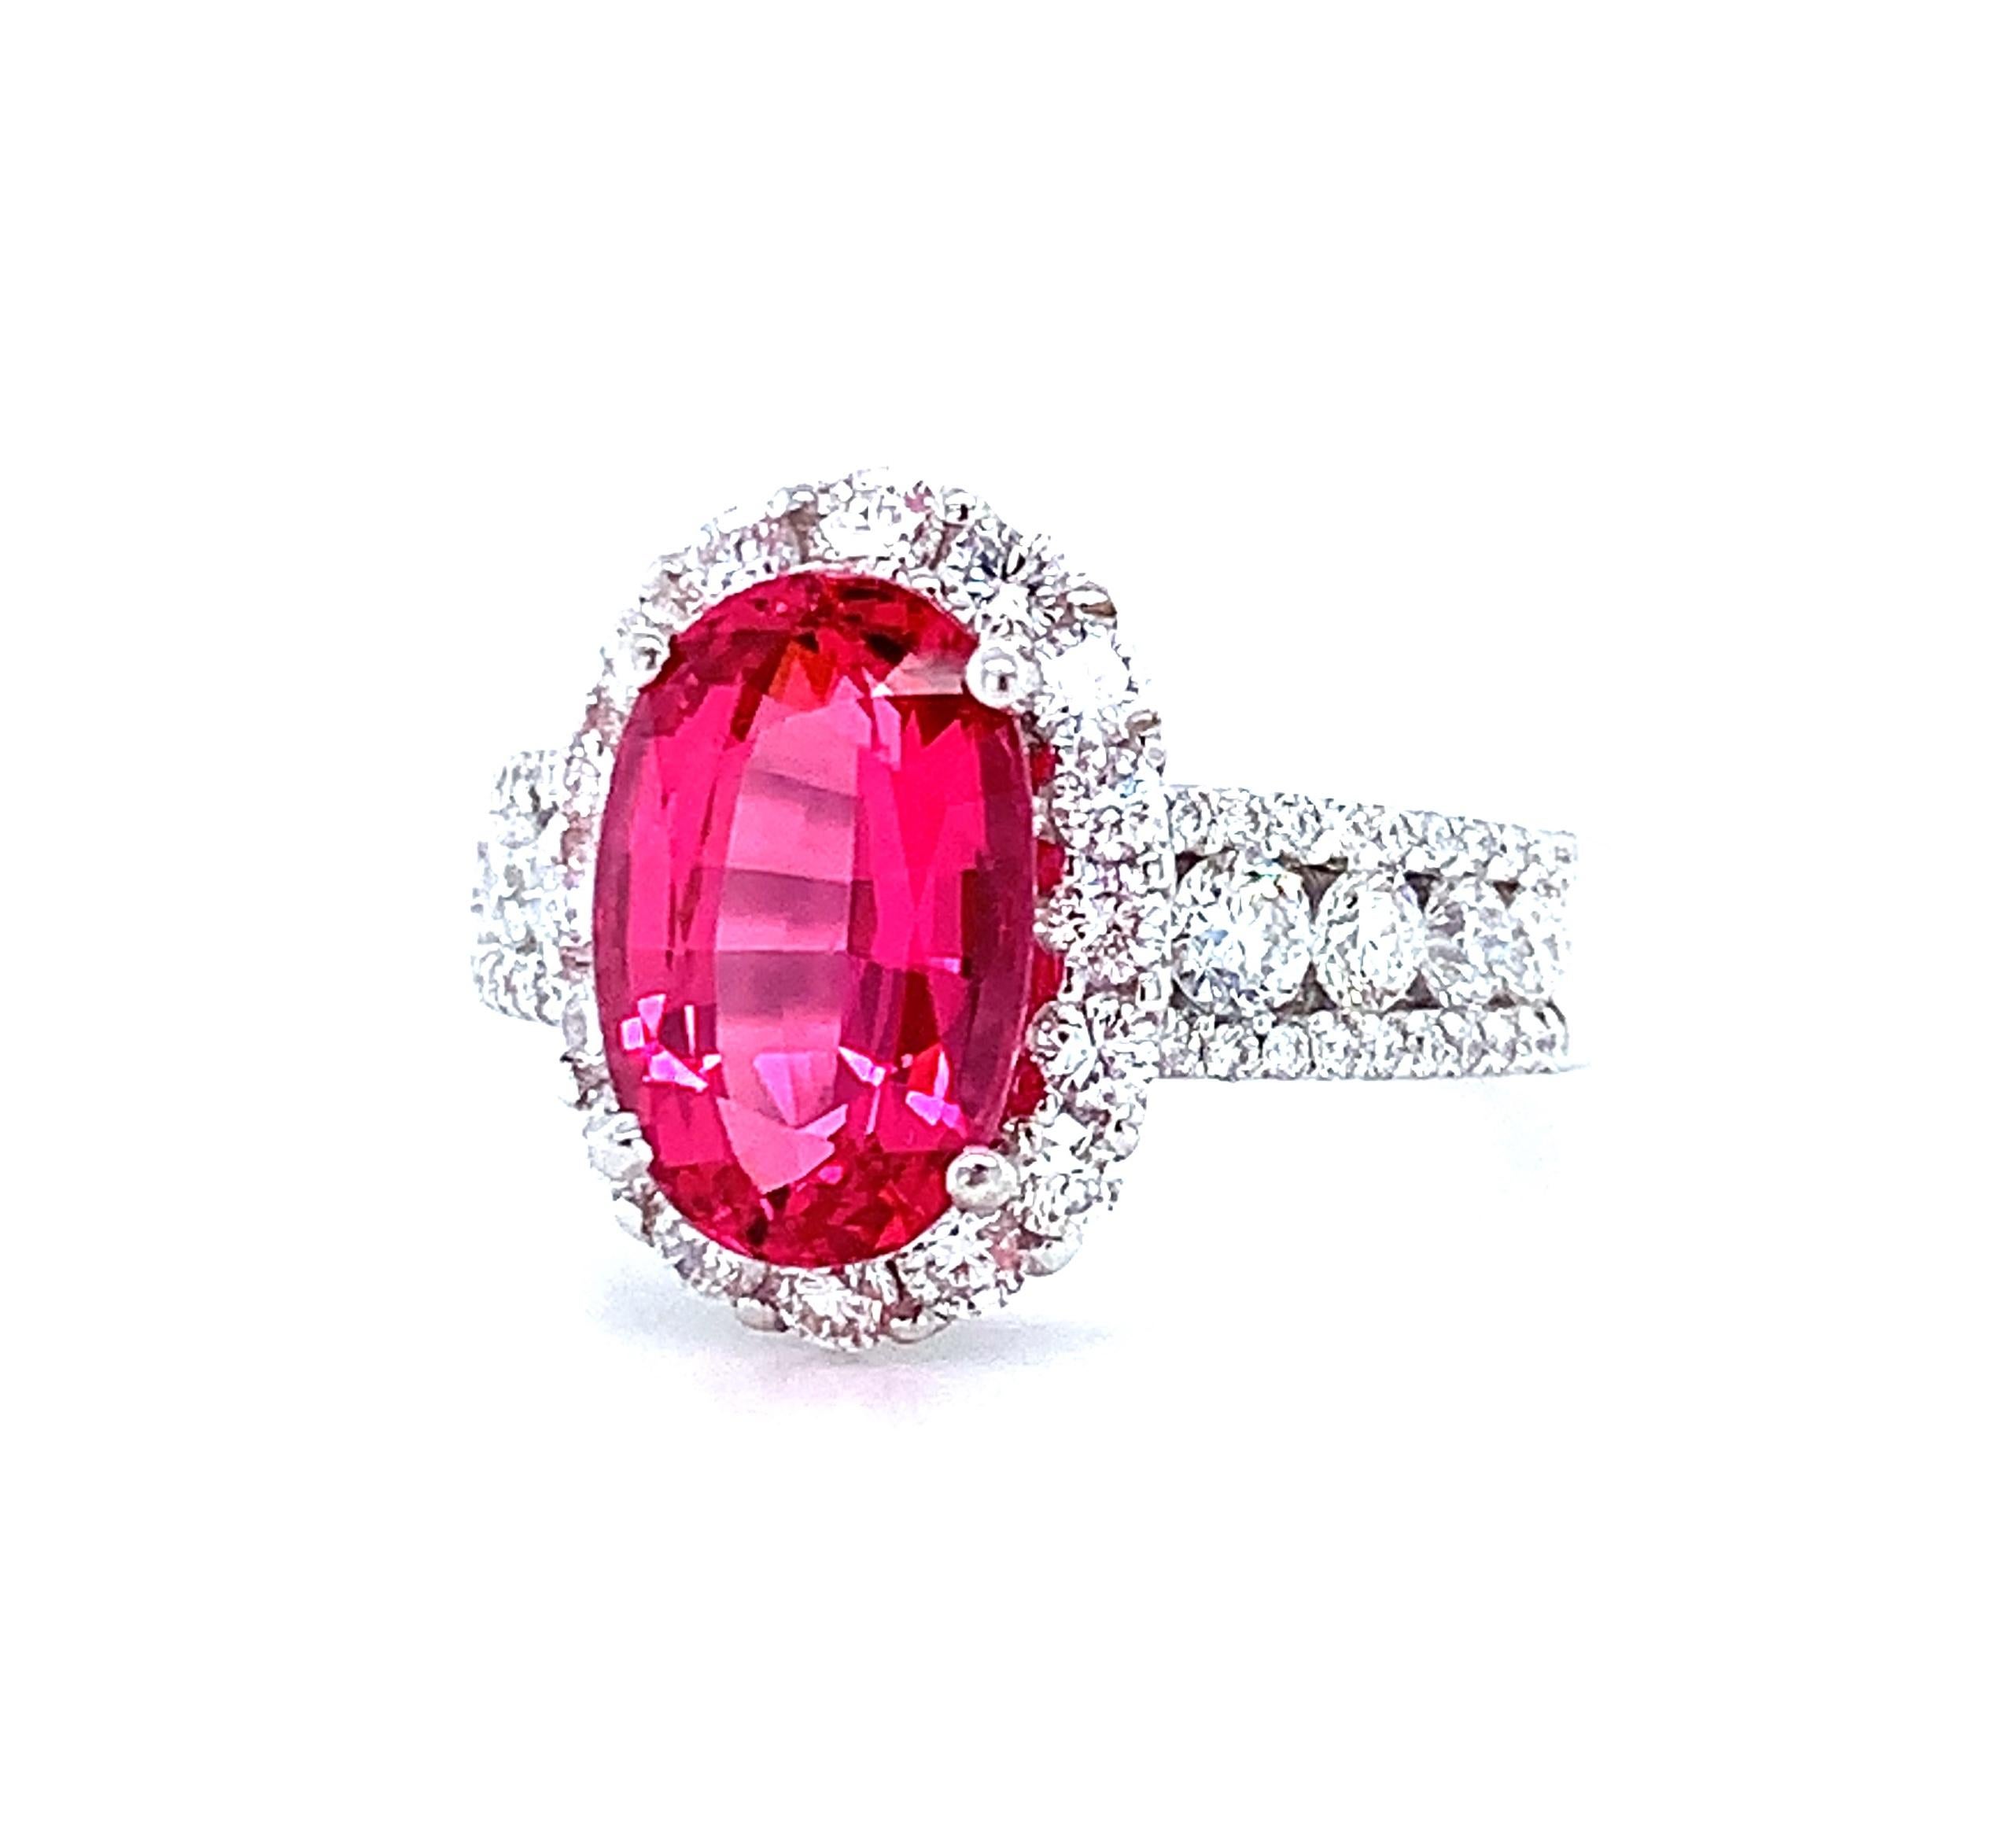 Artisan 3.63 Carat Red Spinel and Diamond Halo Cocktail Ring in 18k White Gold  For Sale